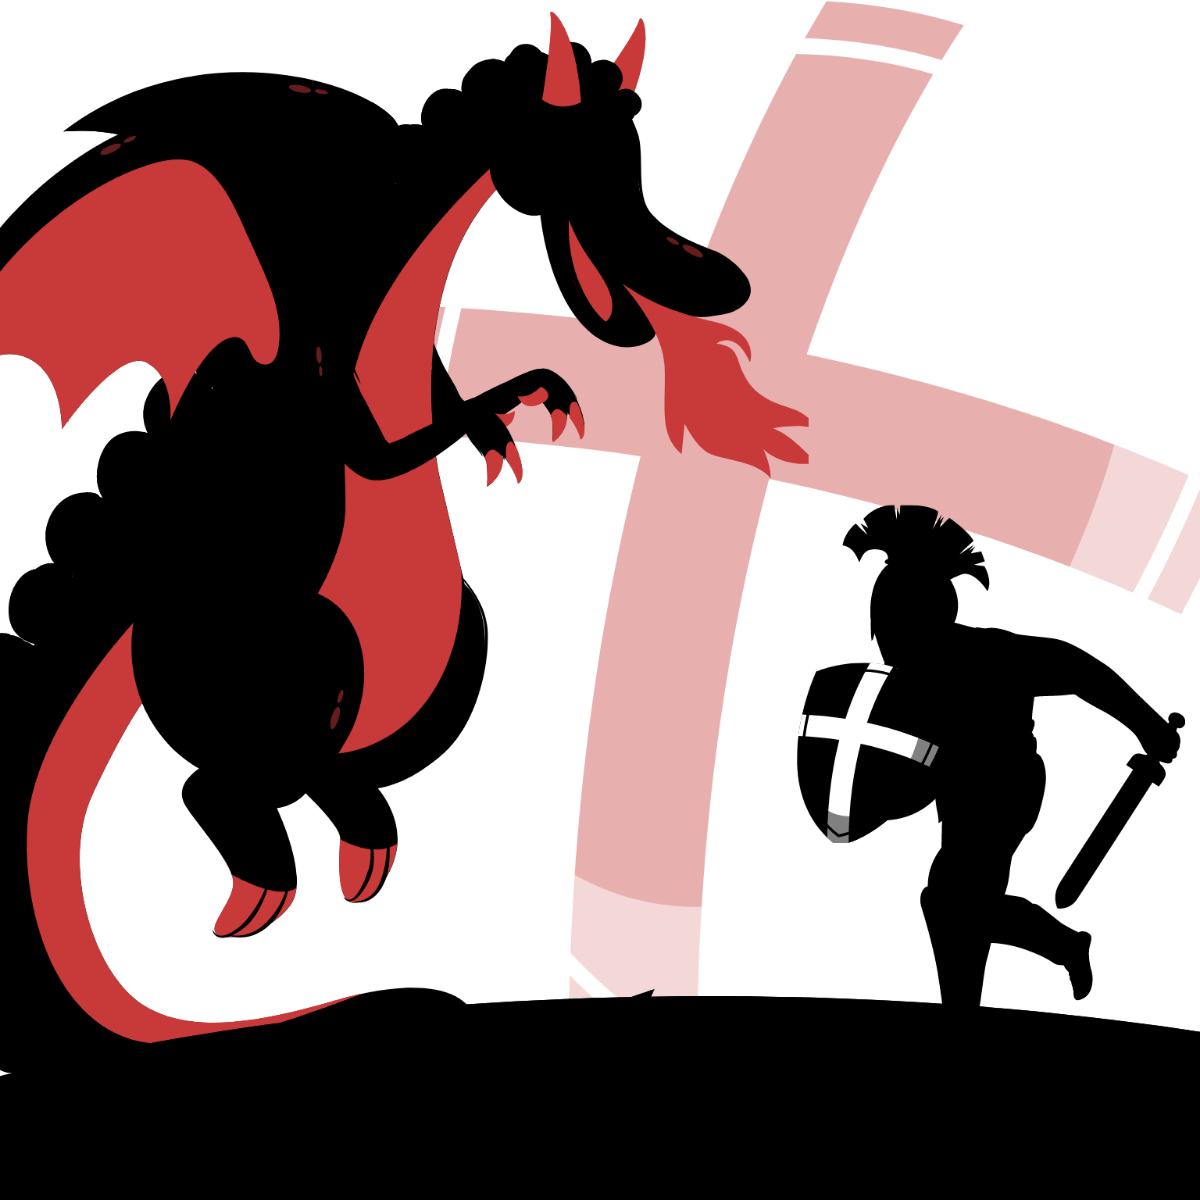 Free St. George's Day Illustration Template